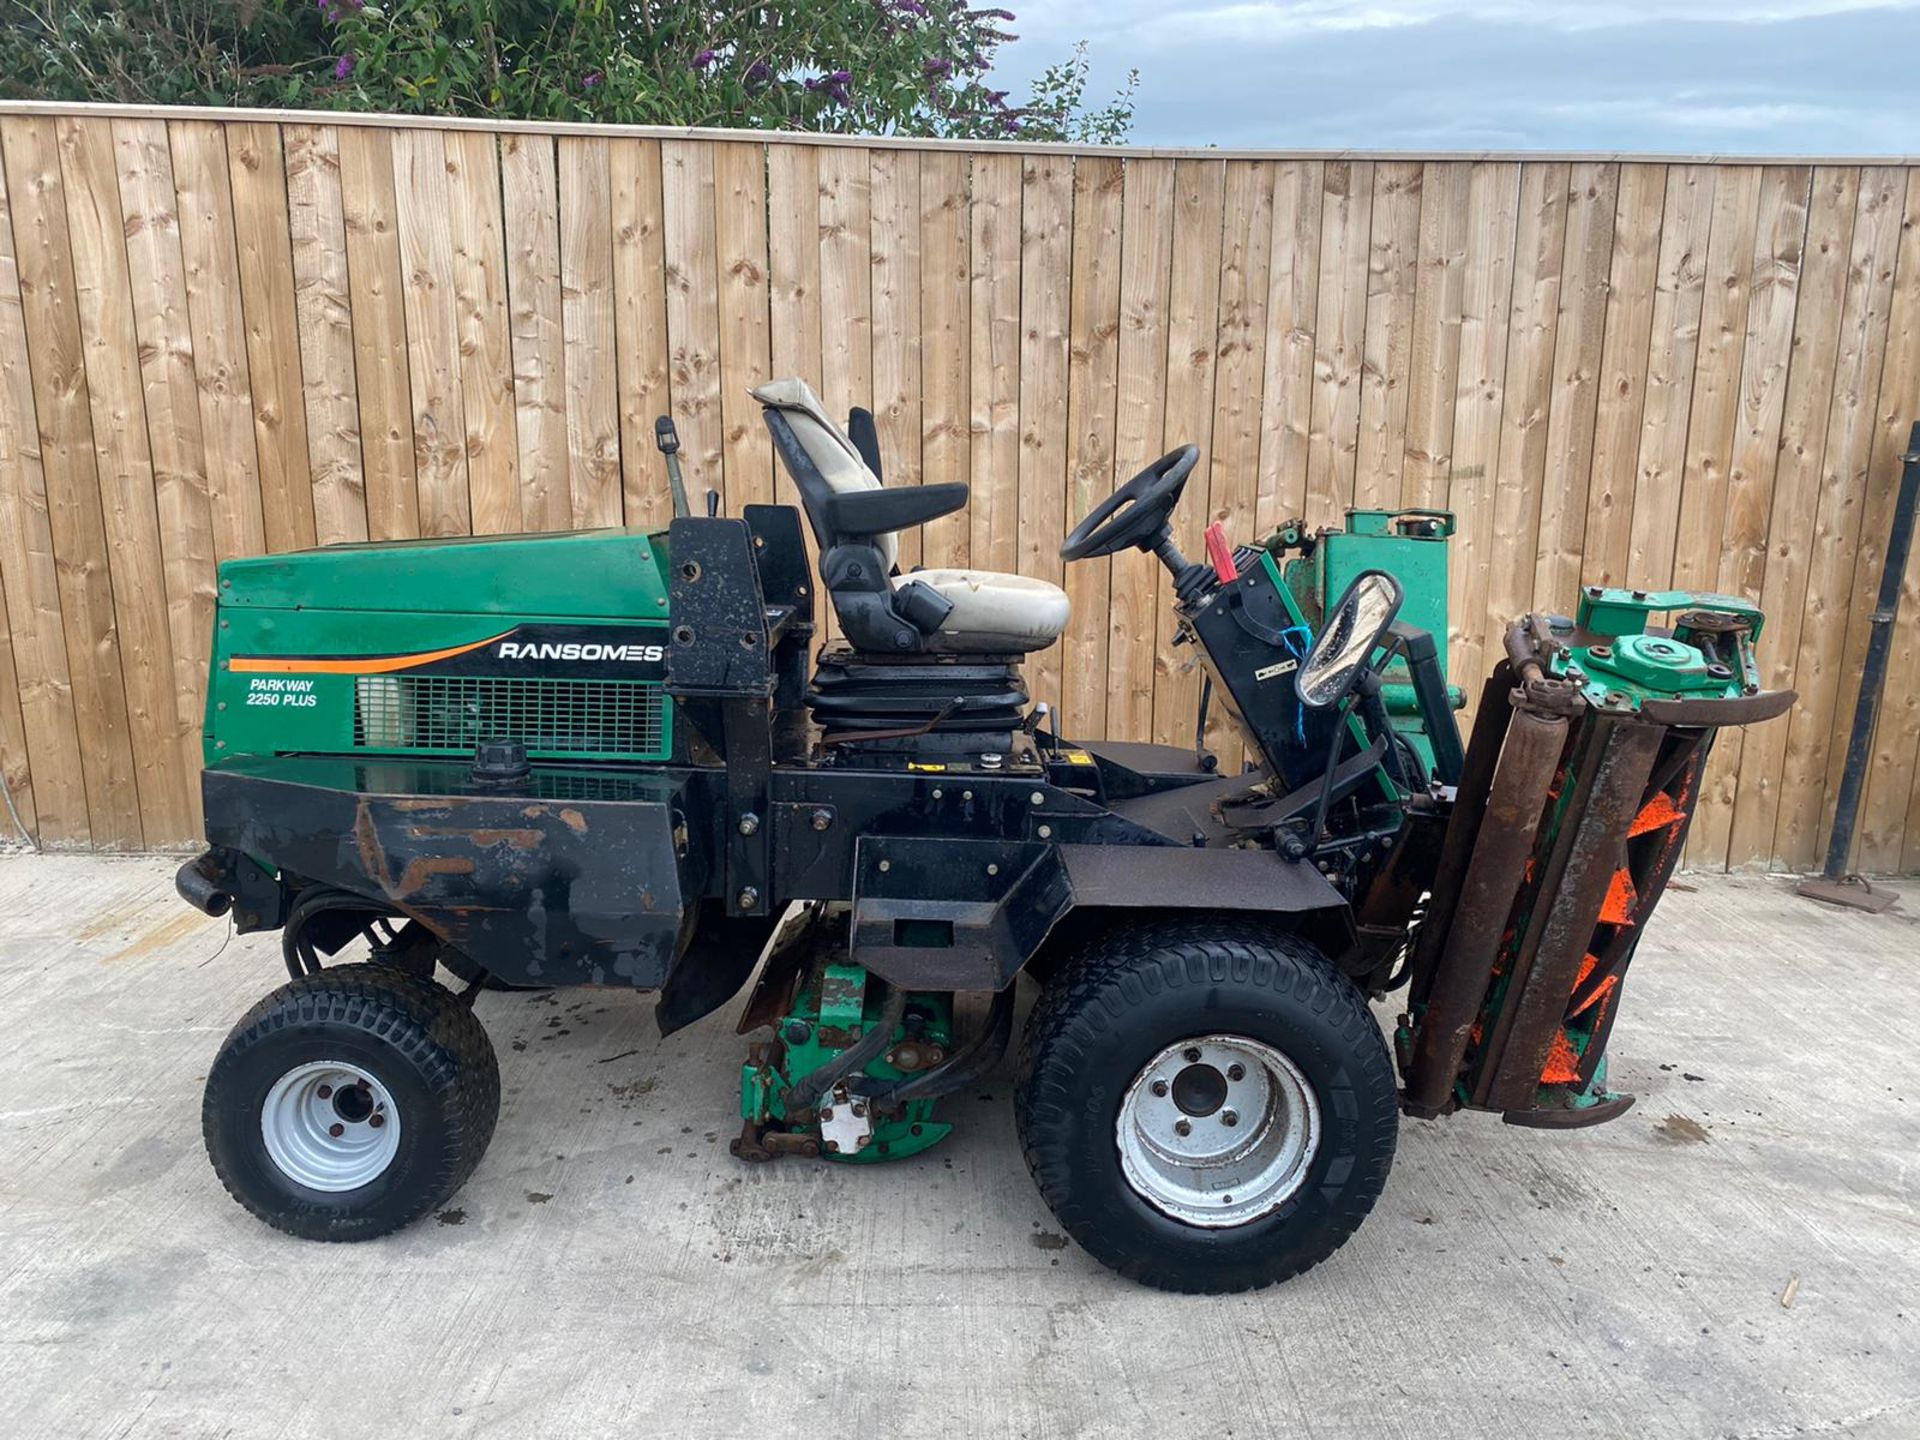 RANSOMES PARKWAY 2250 DIESEL RIDE ON MOWER.LOCATION NORTH YORKSHIRE. - Image 2 of 3